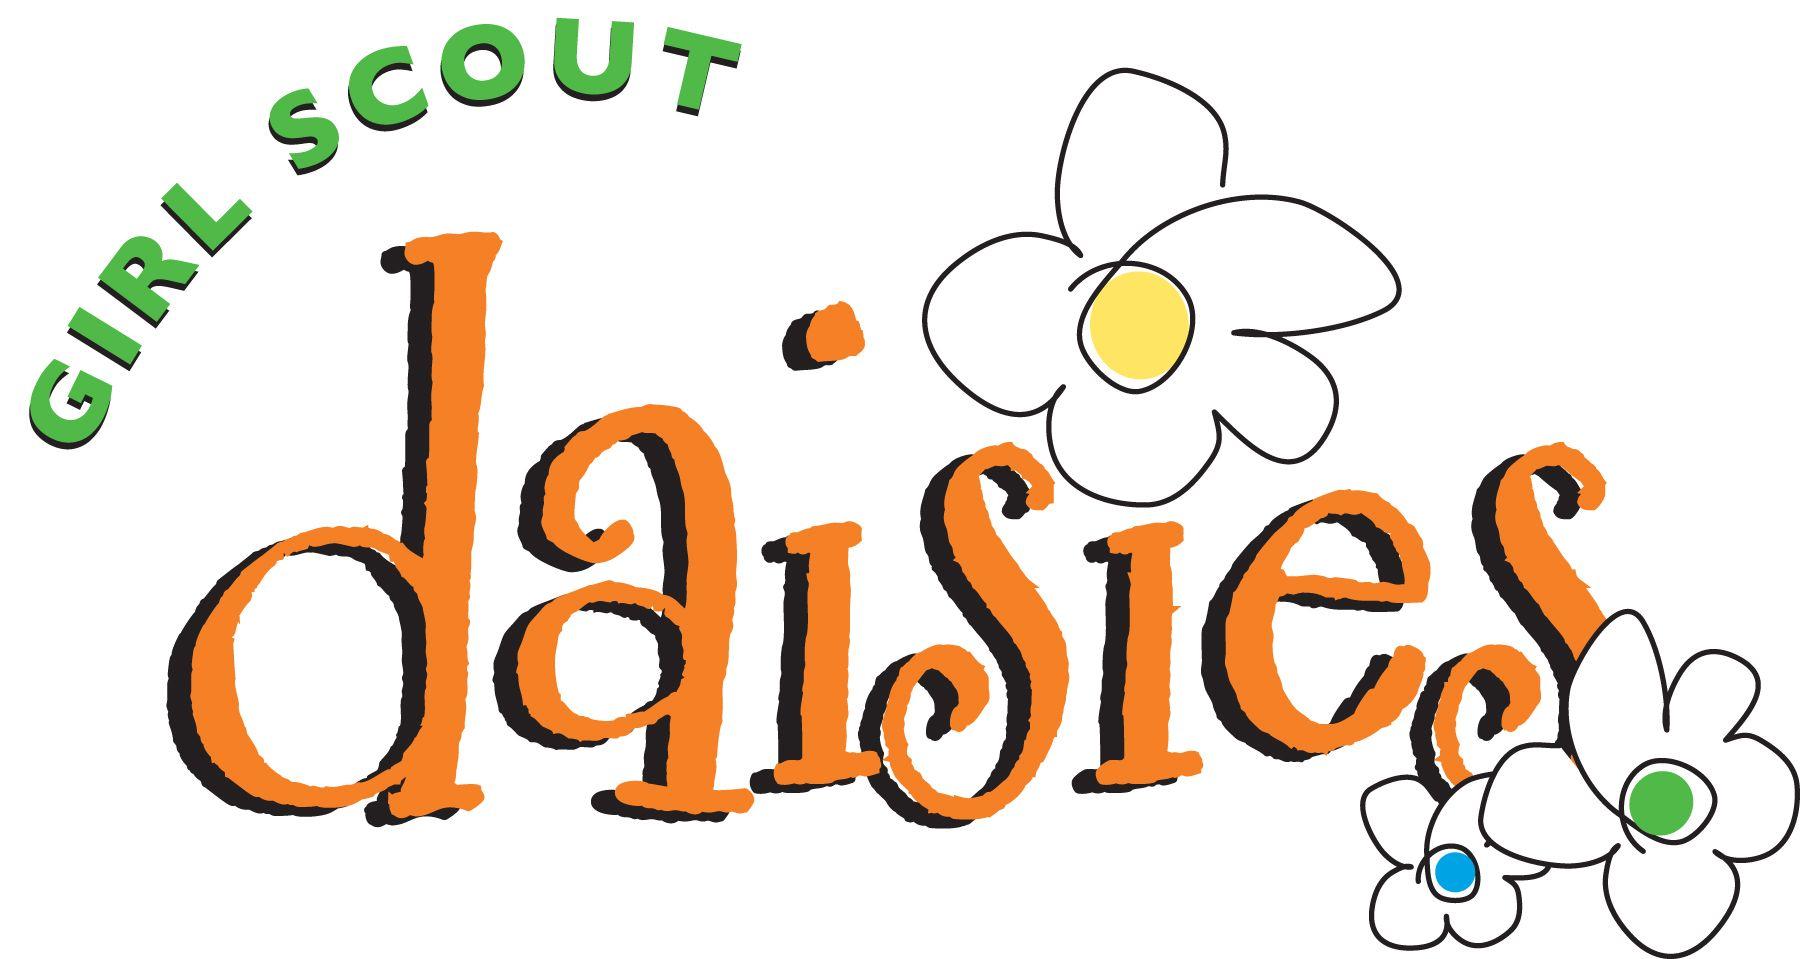 Daisy Scout Logo - Daisy Girl Scout Clip Art Image. Girl Scout Ideas. Girl scouts